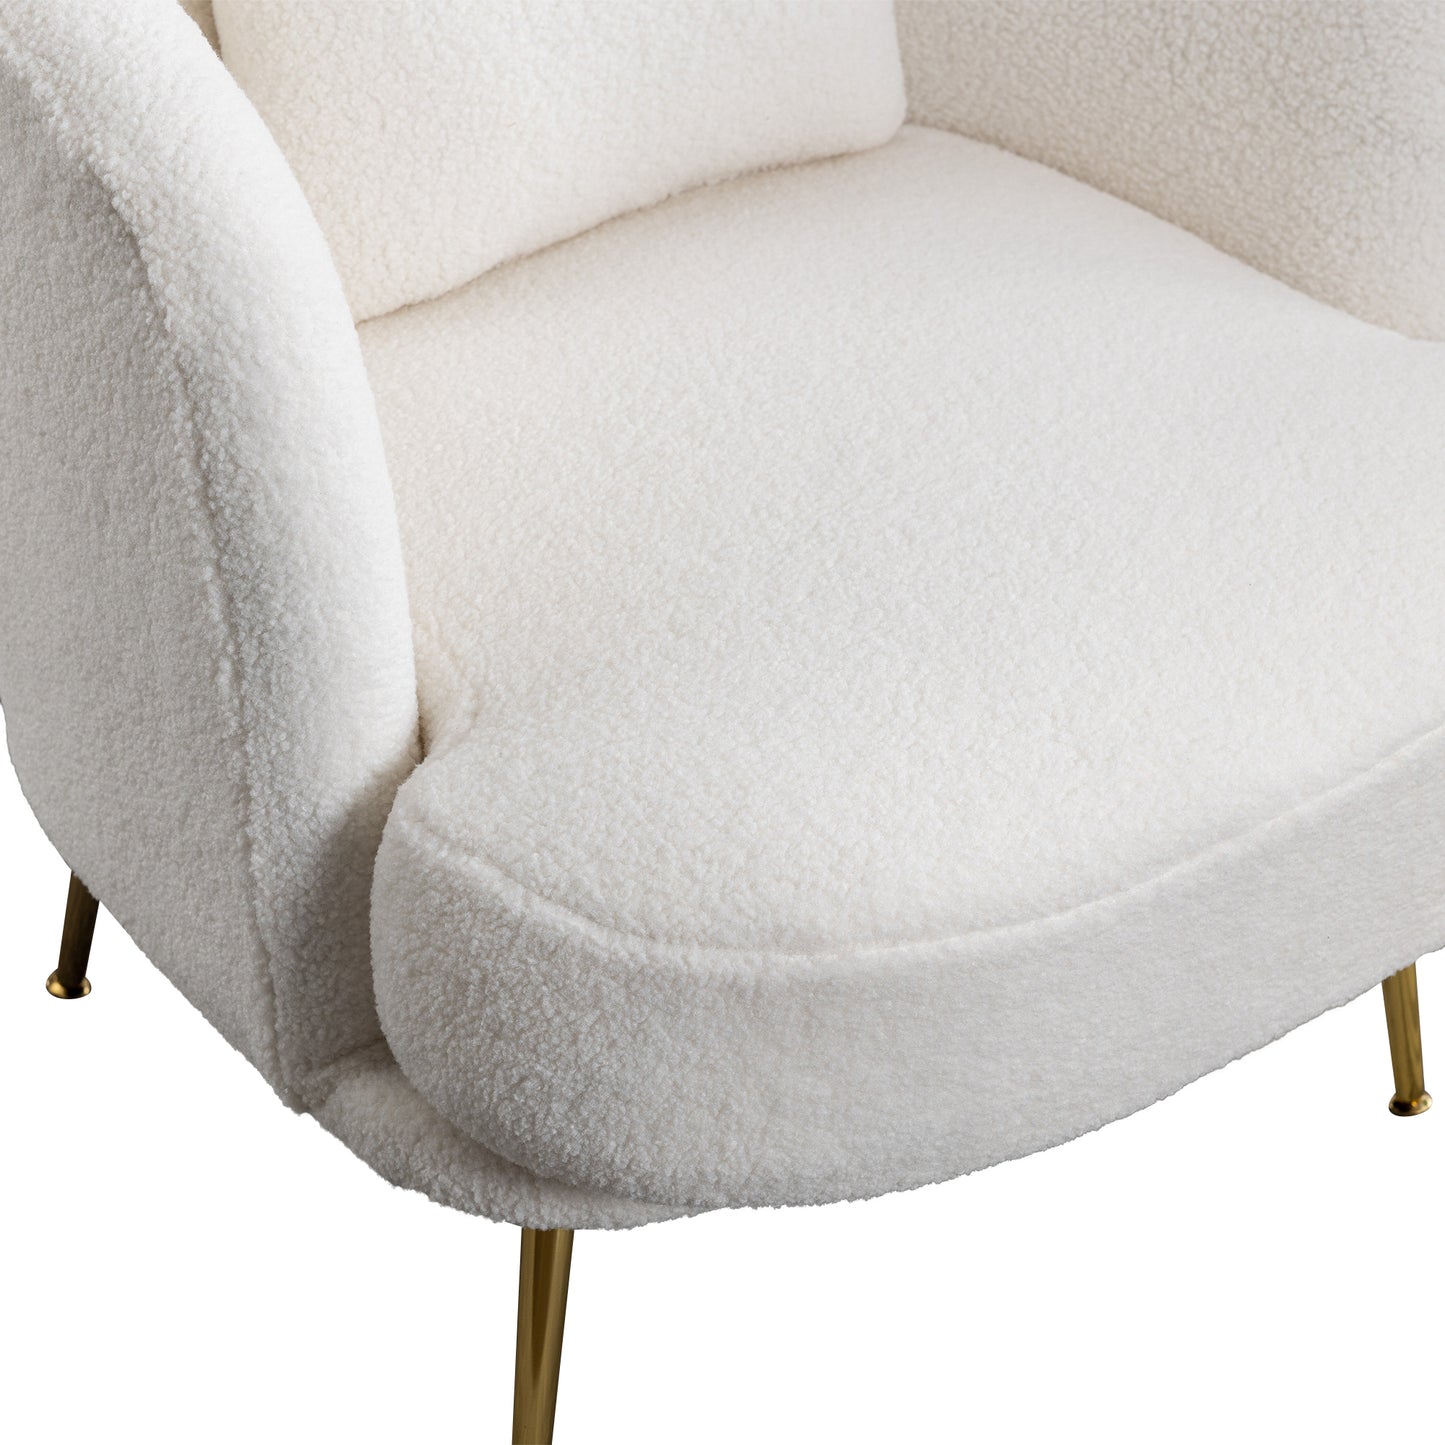 30.32"W Accent Chair Upholstered Curved Backrest Reading Chair Single Sofa Leisure Club Chair with Golden Adjustable Legs For Living Room Bedroom Dorm Room (Ivory Boucle)